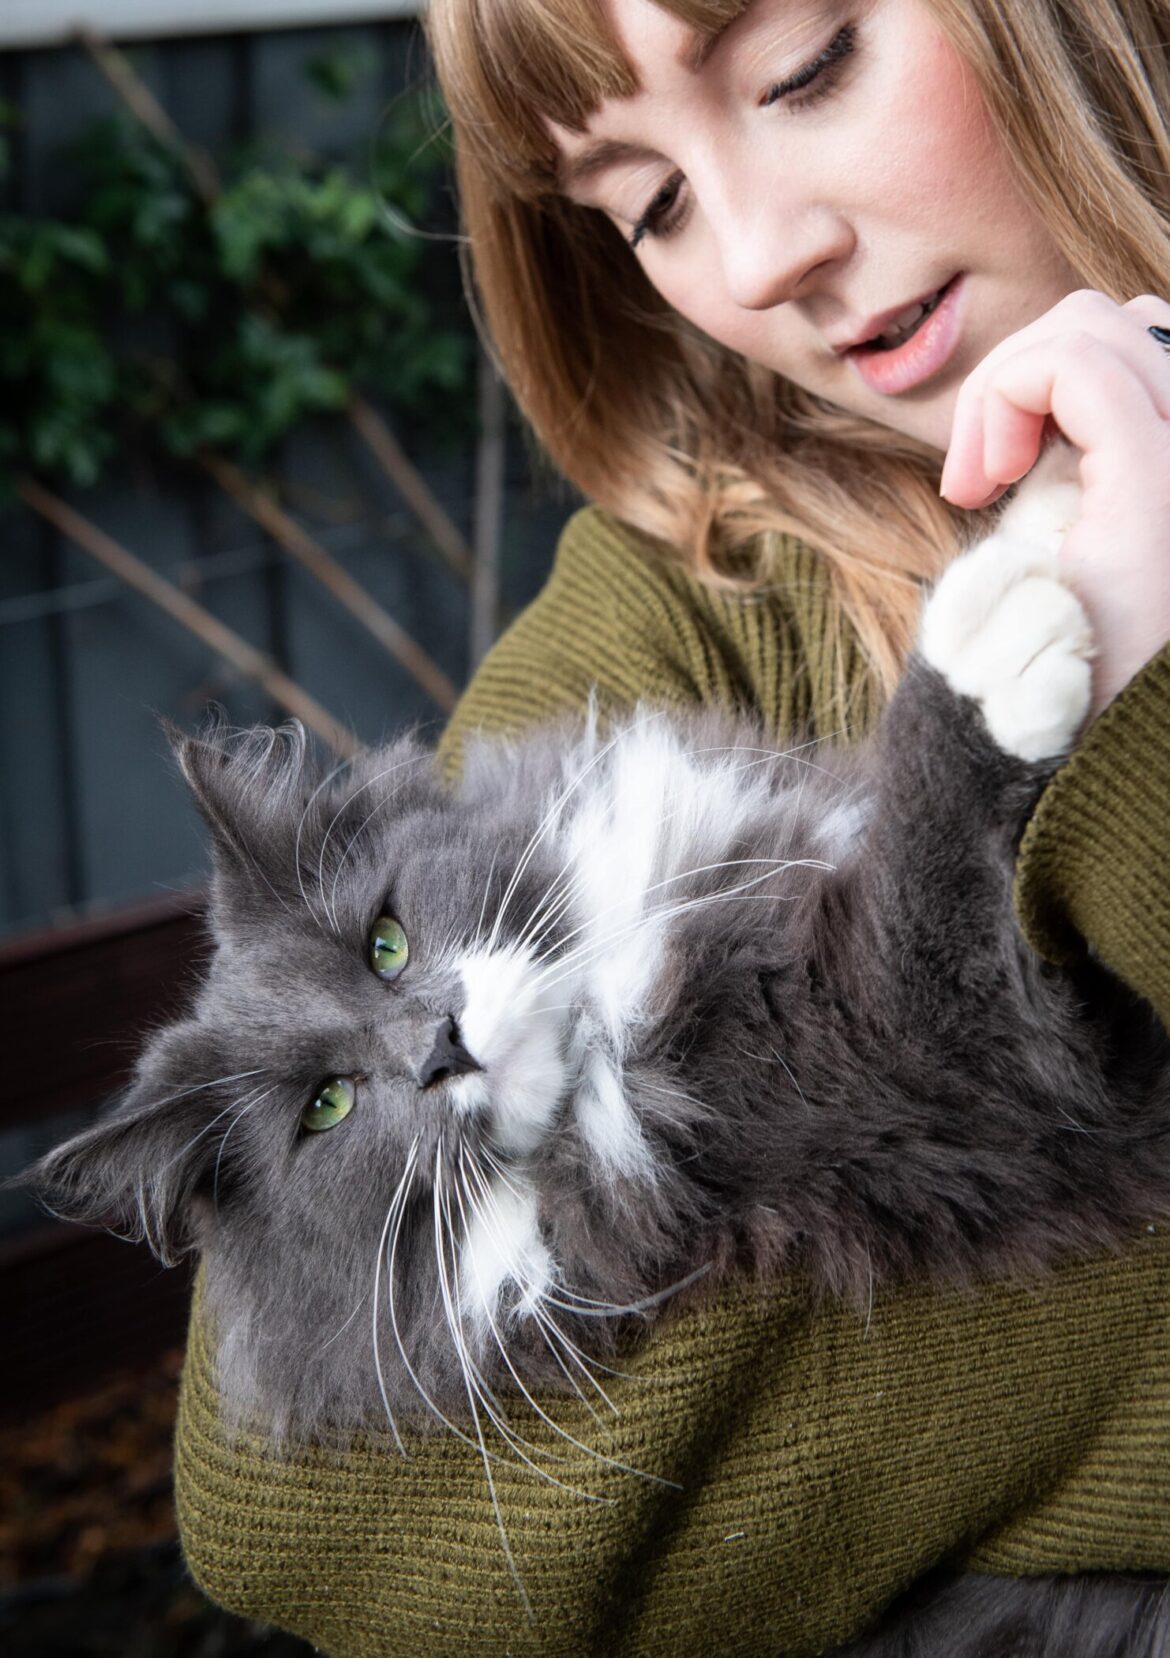 Top 10 Tips For Creating The Purr-fect Relationship With Your Cat